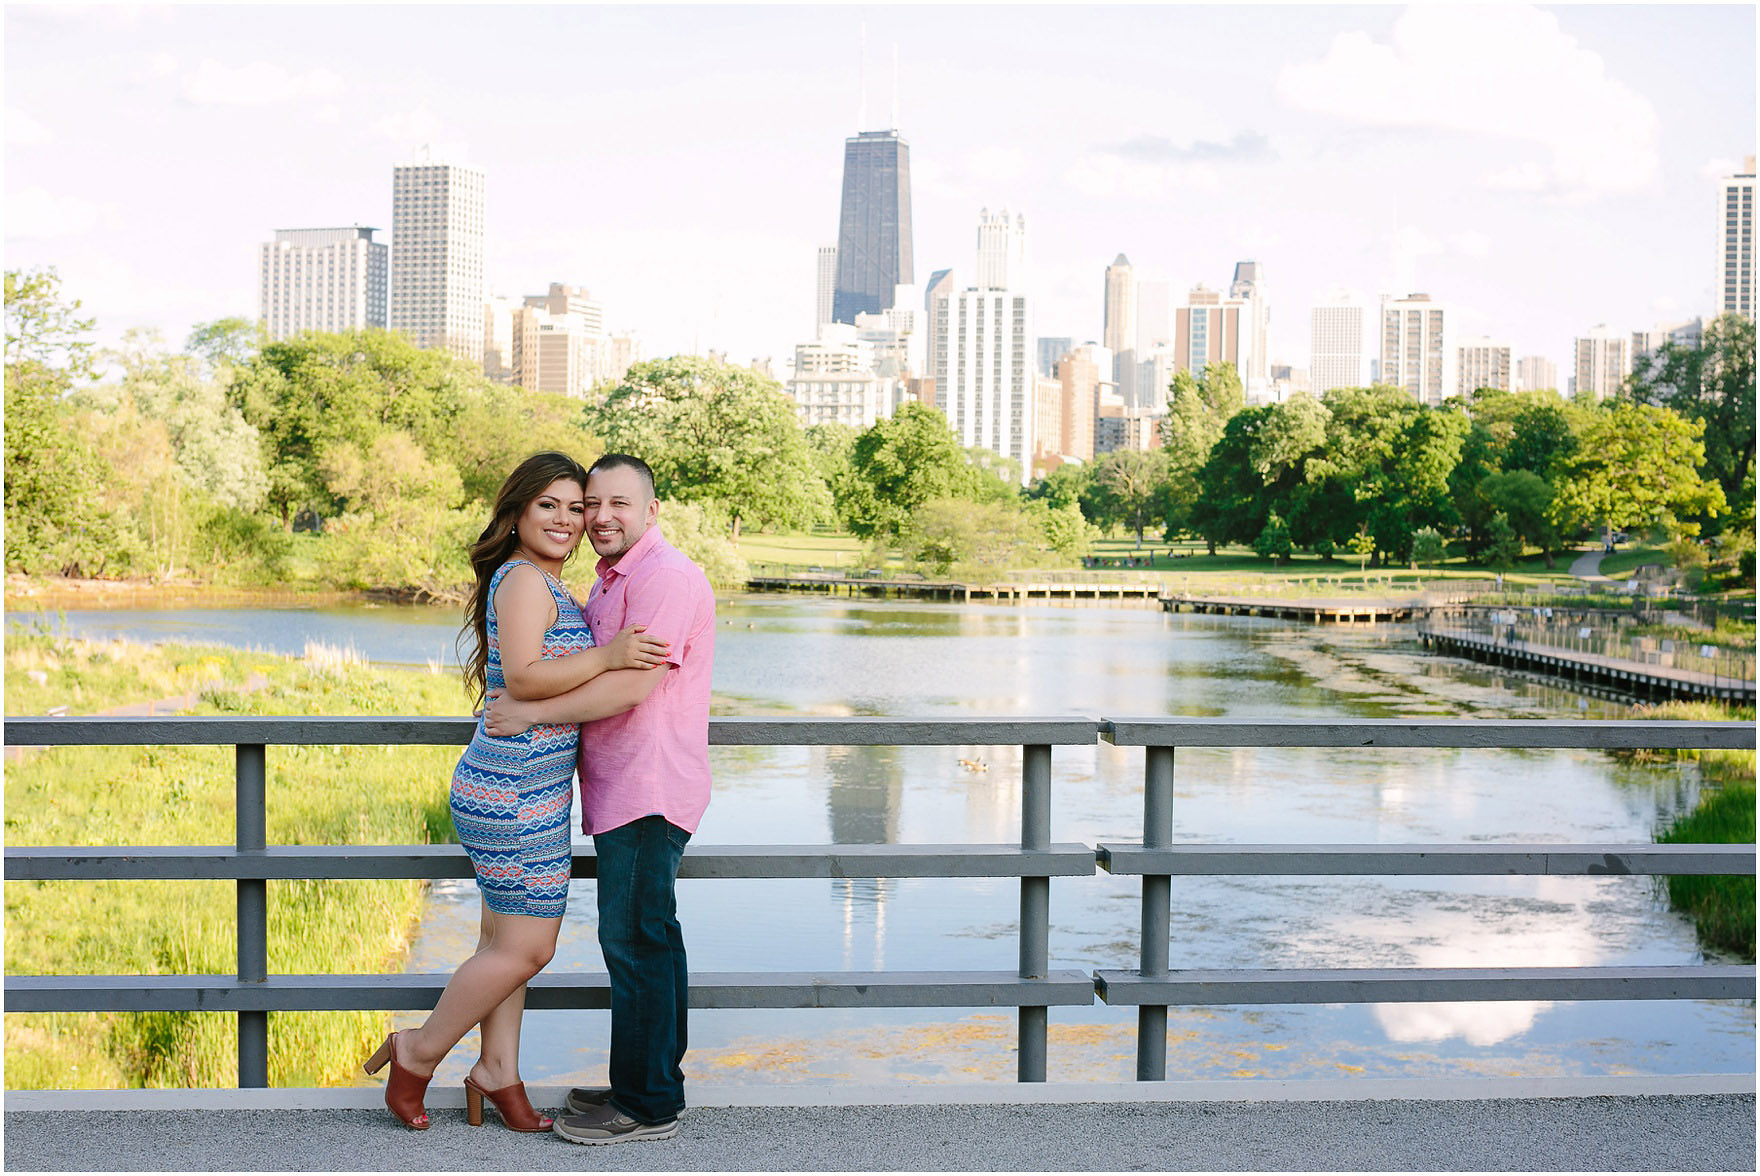 LincolnParkZooEngagementPhotosLincolnParkEngagementPhotosHoneycombEngagementChicagoEngagementPhotographer__0014